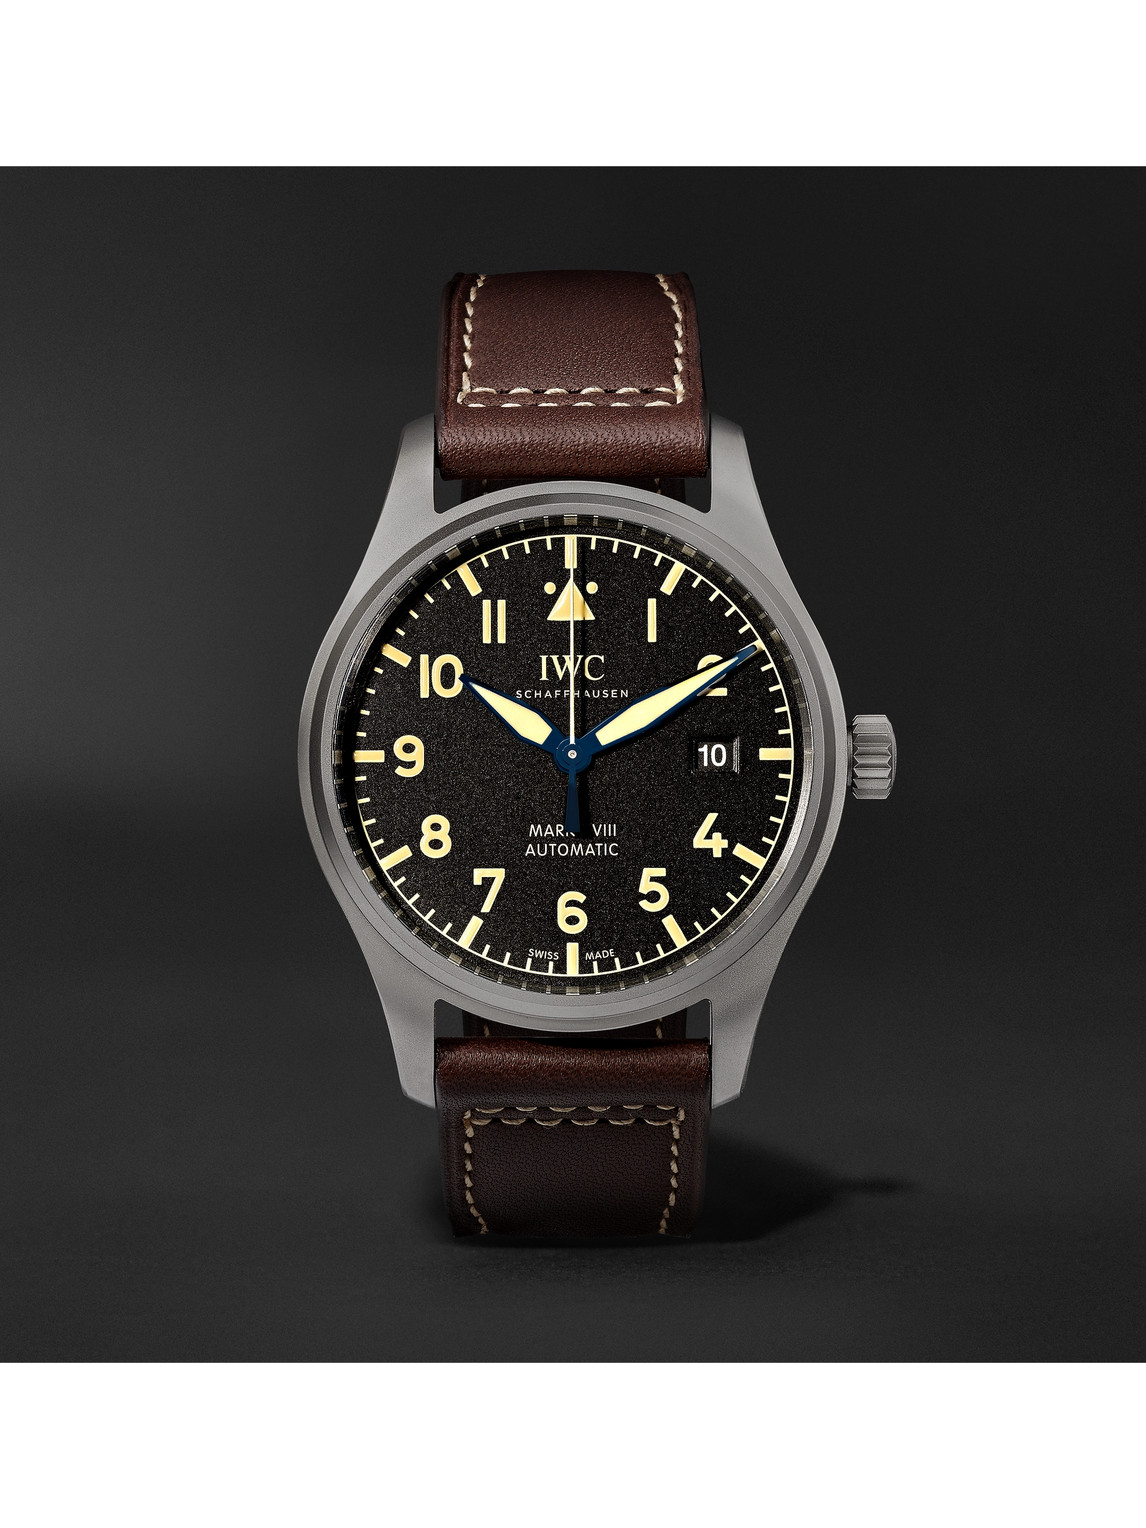 Pilot's Mark XVIII Heritage Automatic 40mm Titanium and Leather Watch, Ref. No. IW327006